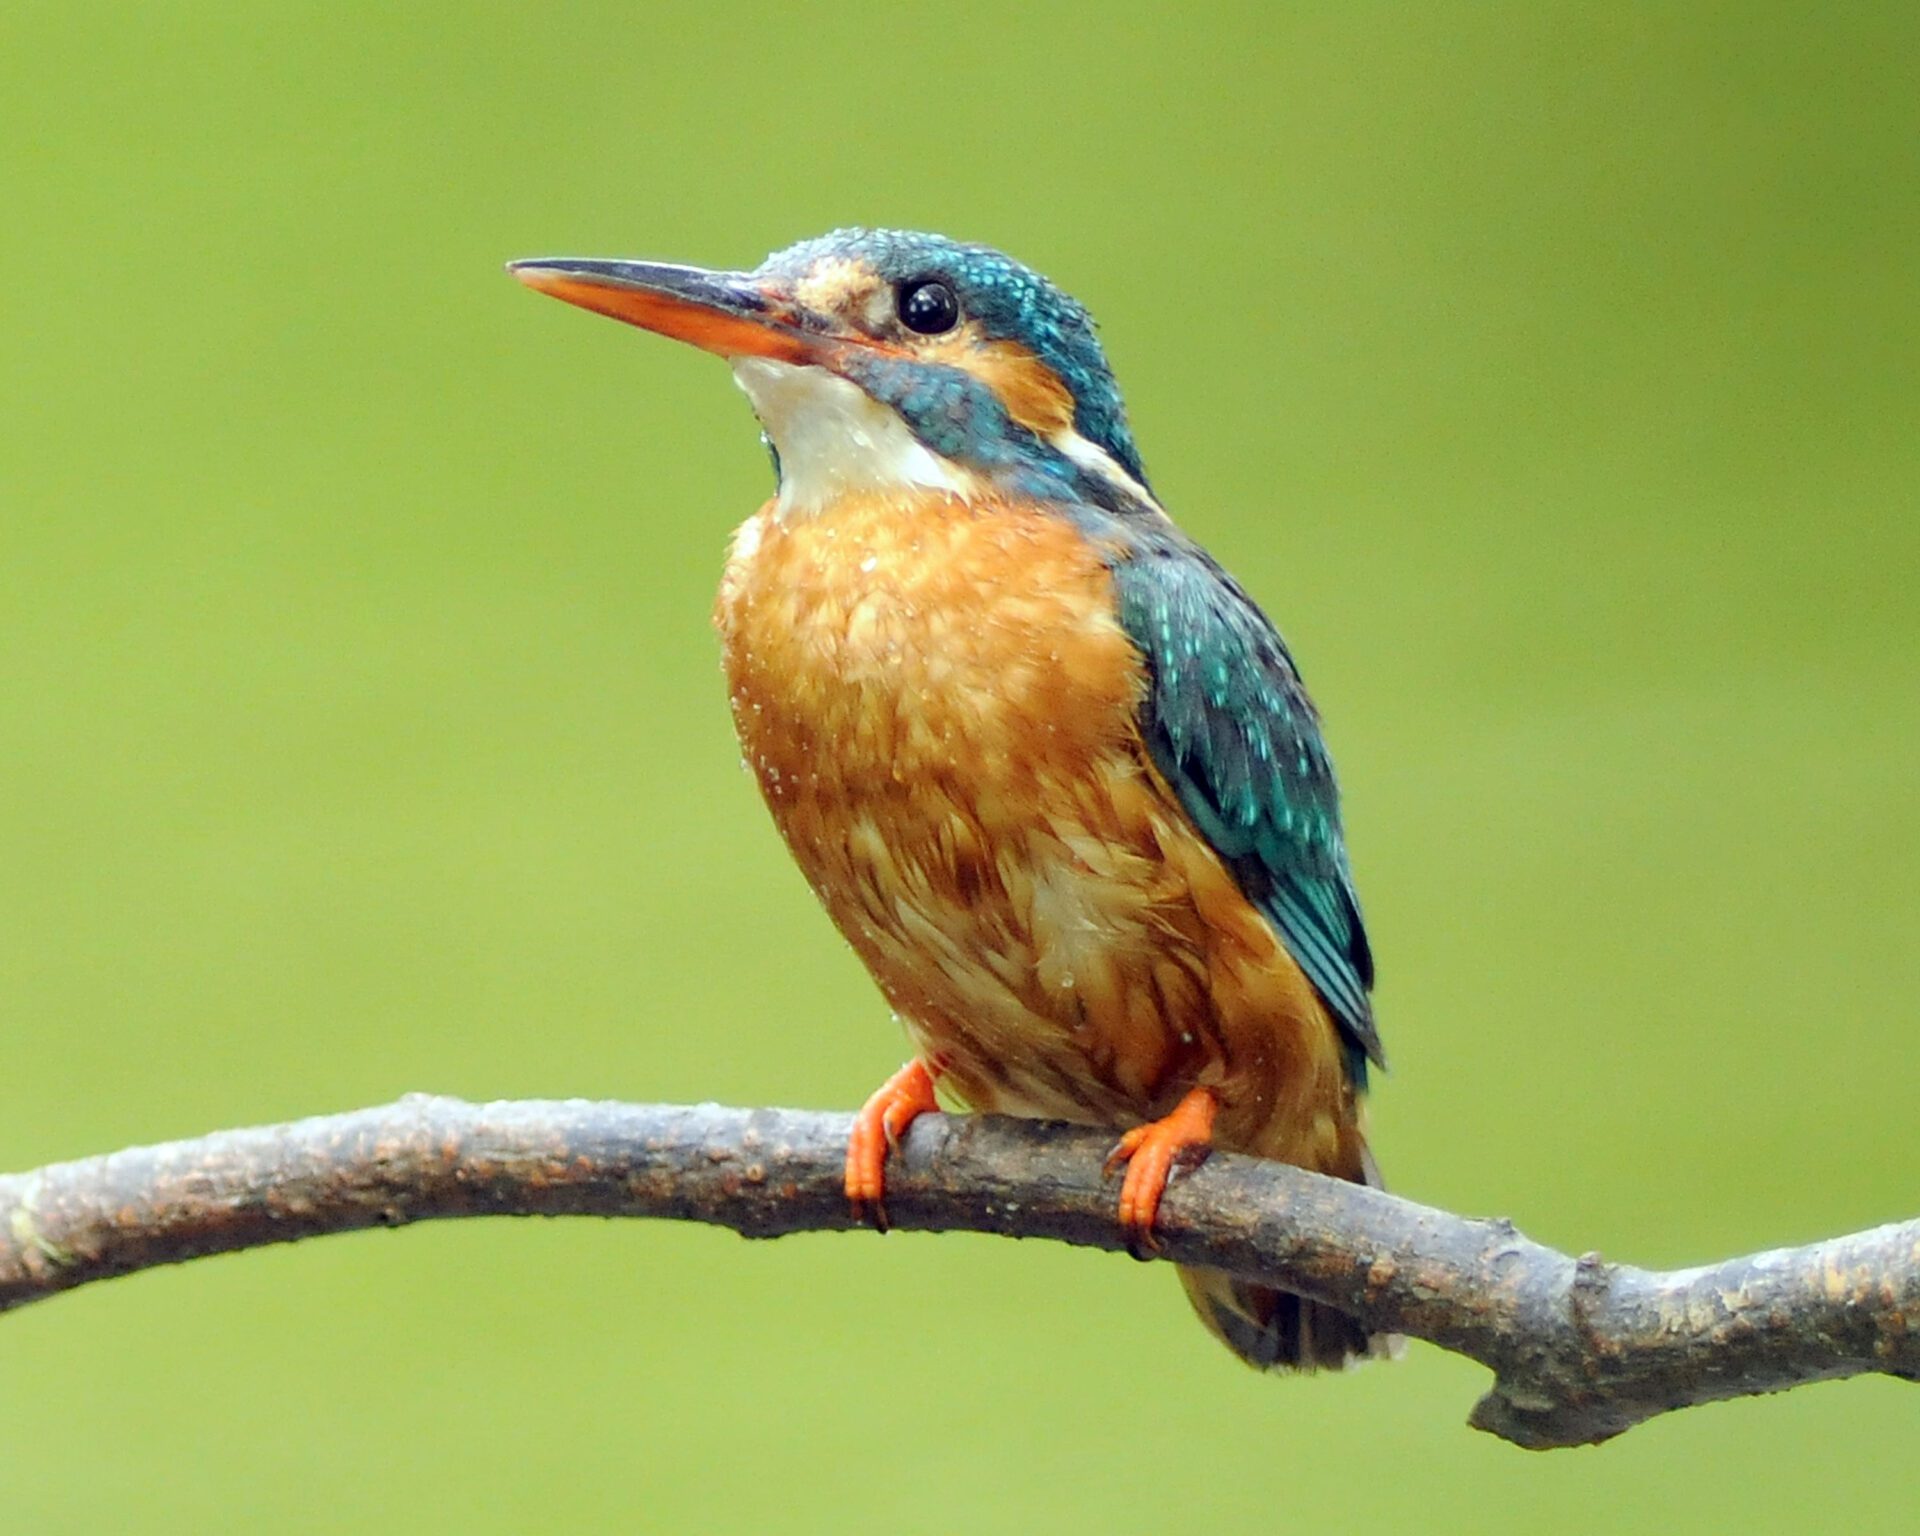 kingfisher-perched-on-a-branch-in-front-of-a-green-background